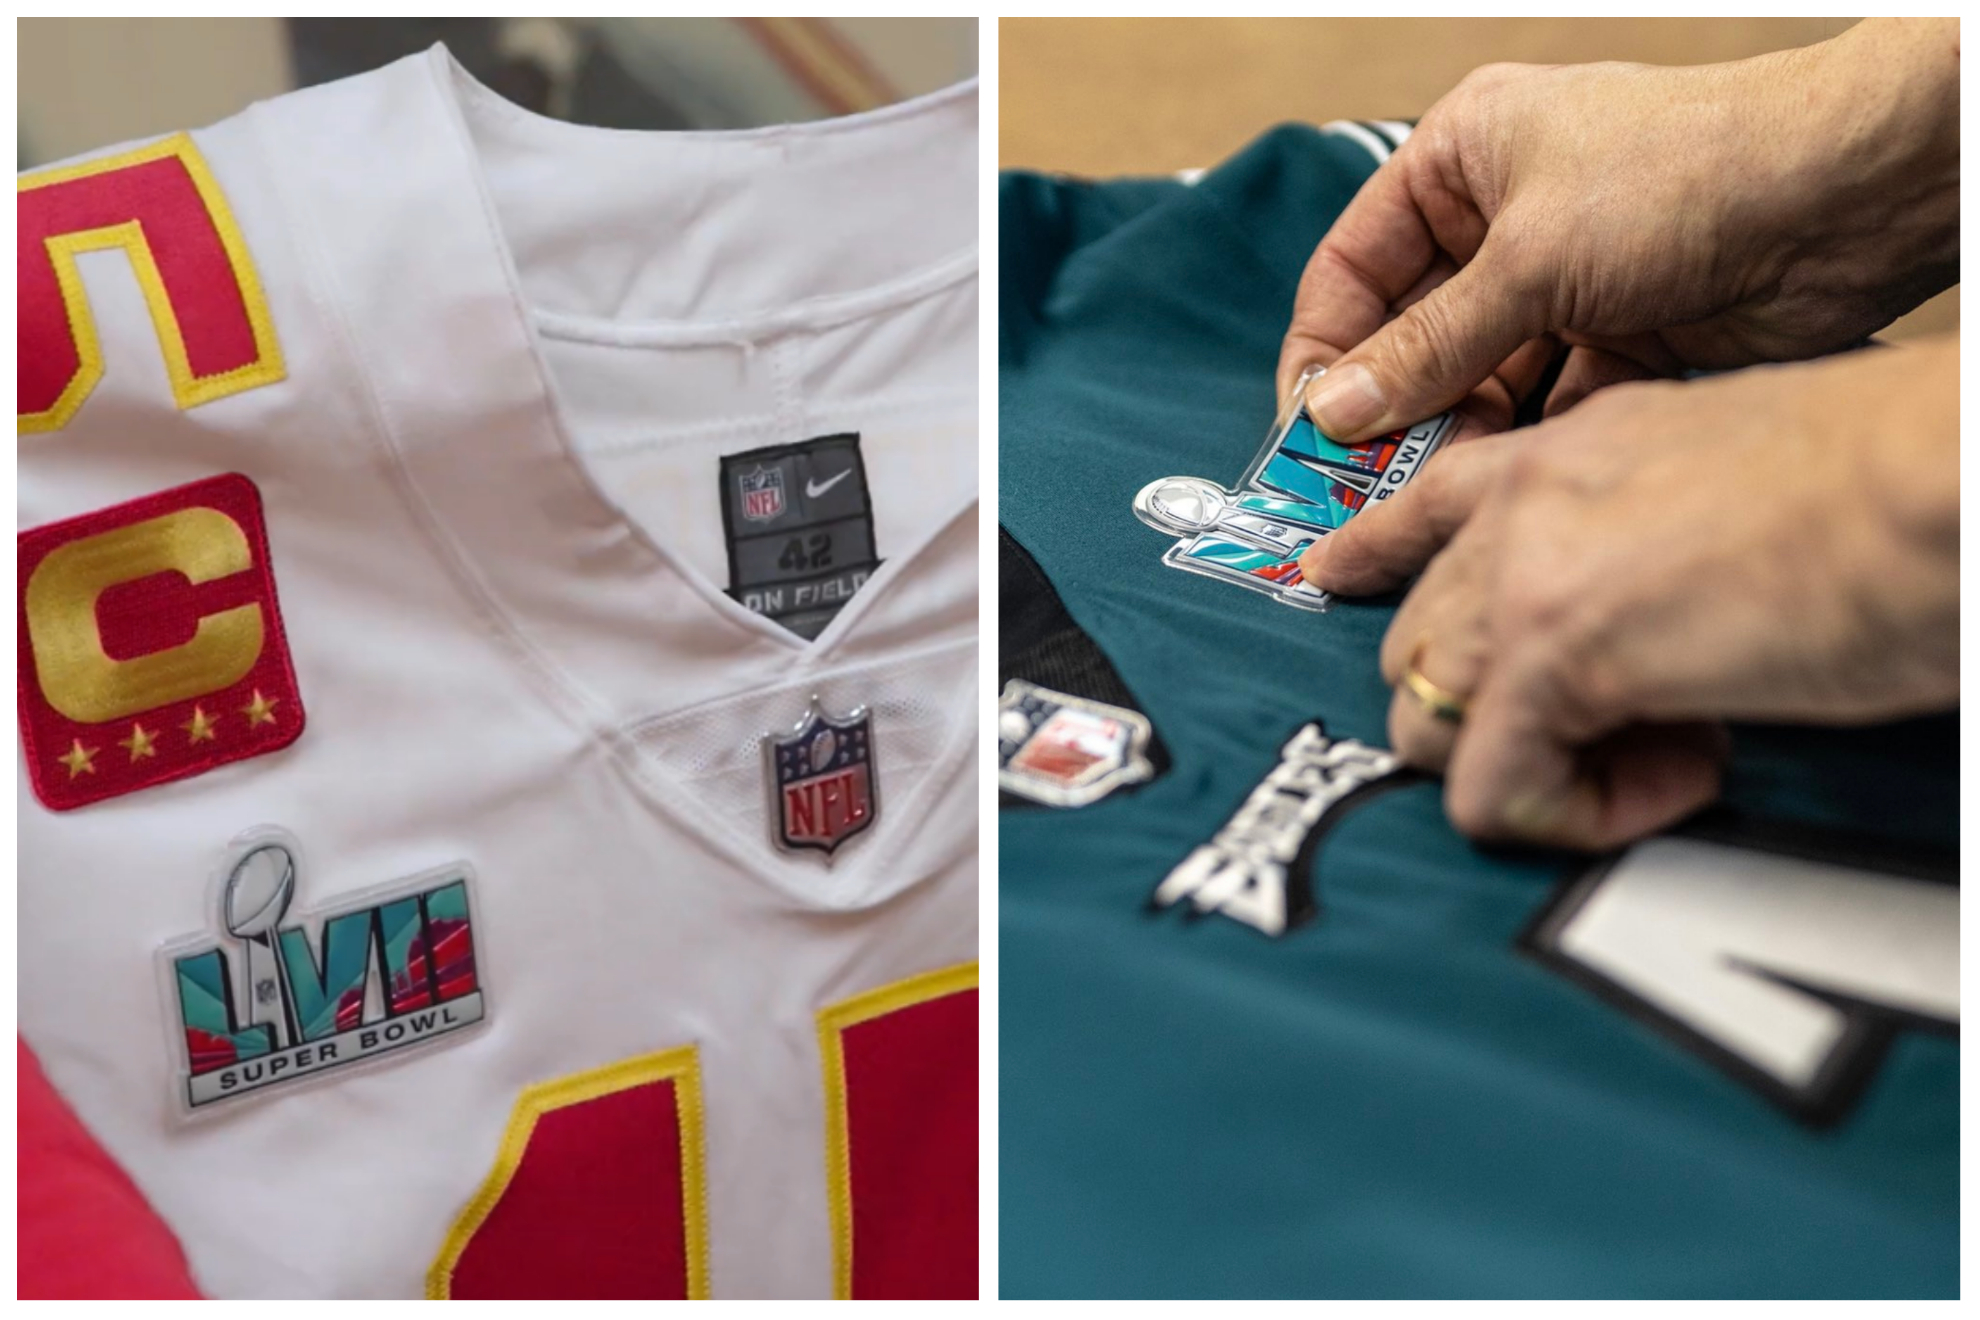 Chiefs will wear white jerseys and the Eagles will wear green jerseys at the Super Bowl.